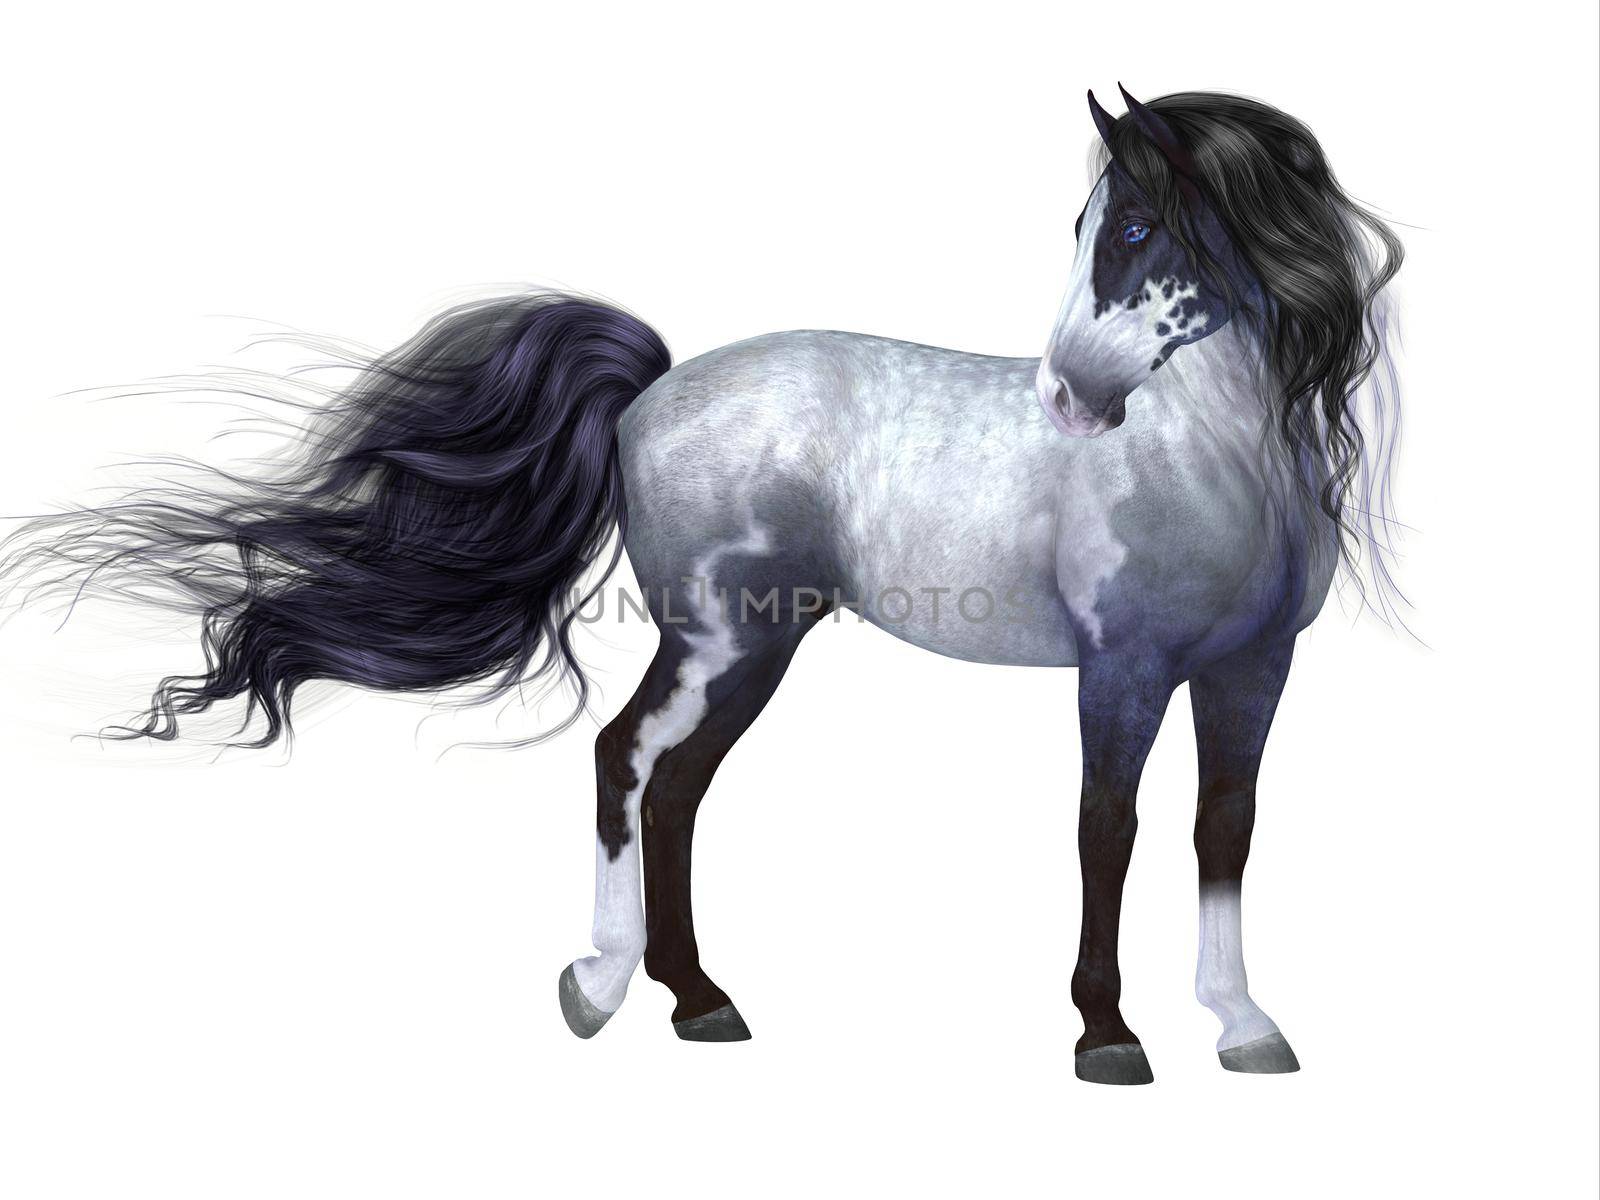 The Blue Roan is a coat color of many different breeds of horses and is distinguished by a base black color.